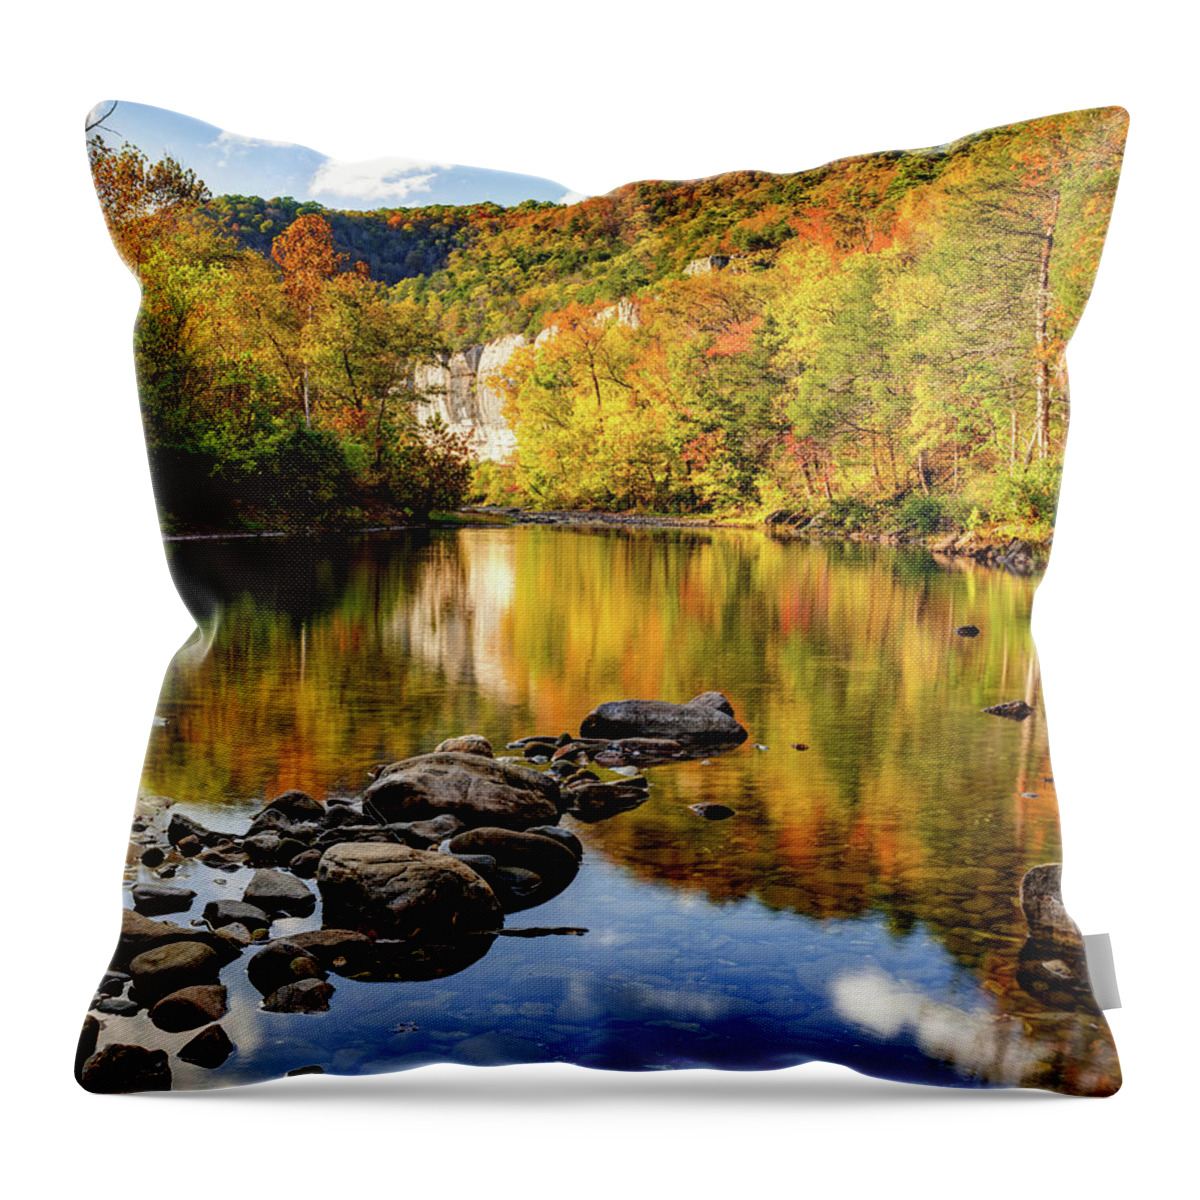 Roark Bluff Throw Pillow featuring the photograph Ozark Mountains And Roark Bluff Autumn Reflections by Gregory Ballos